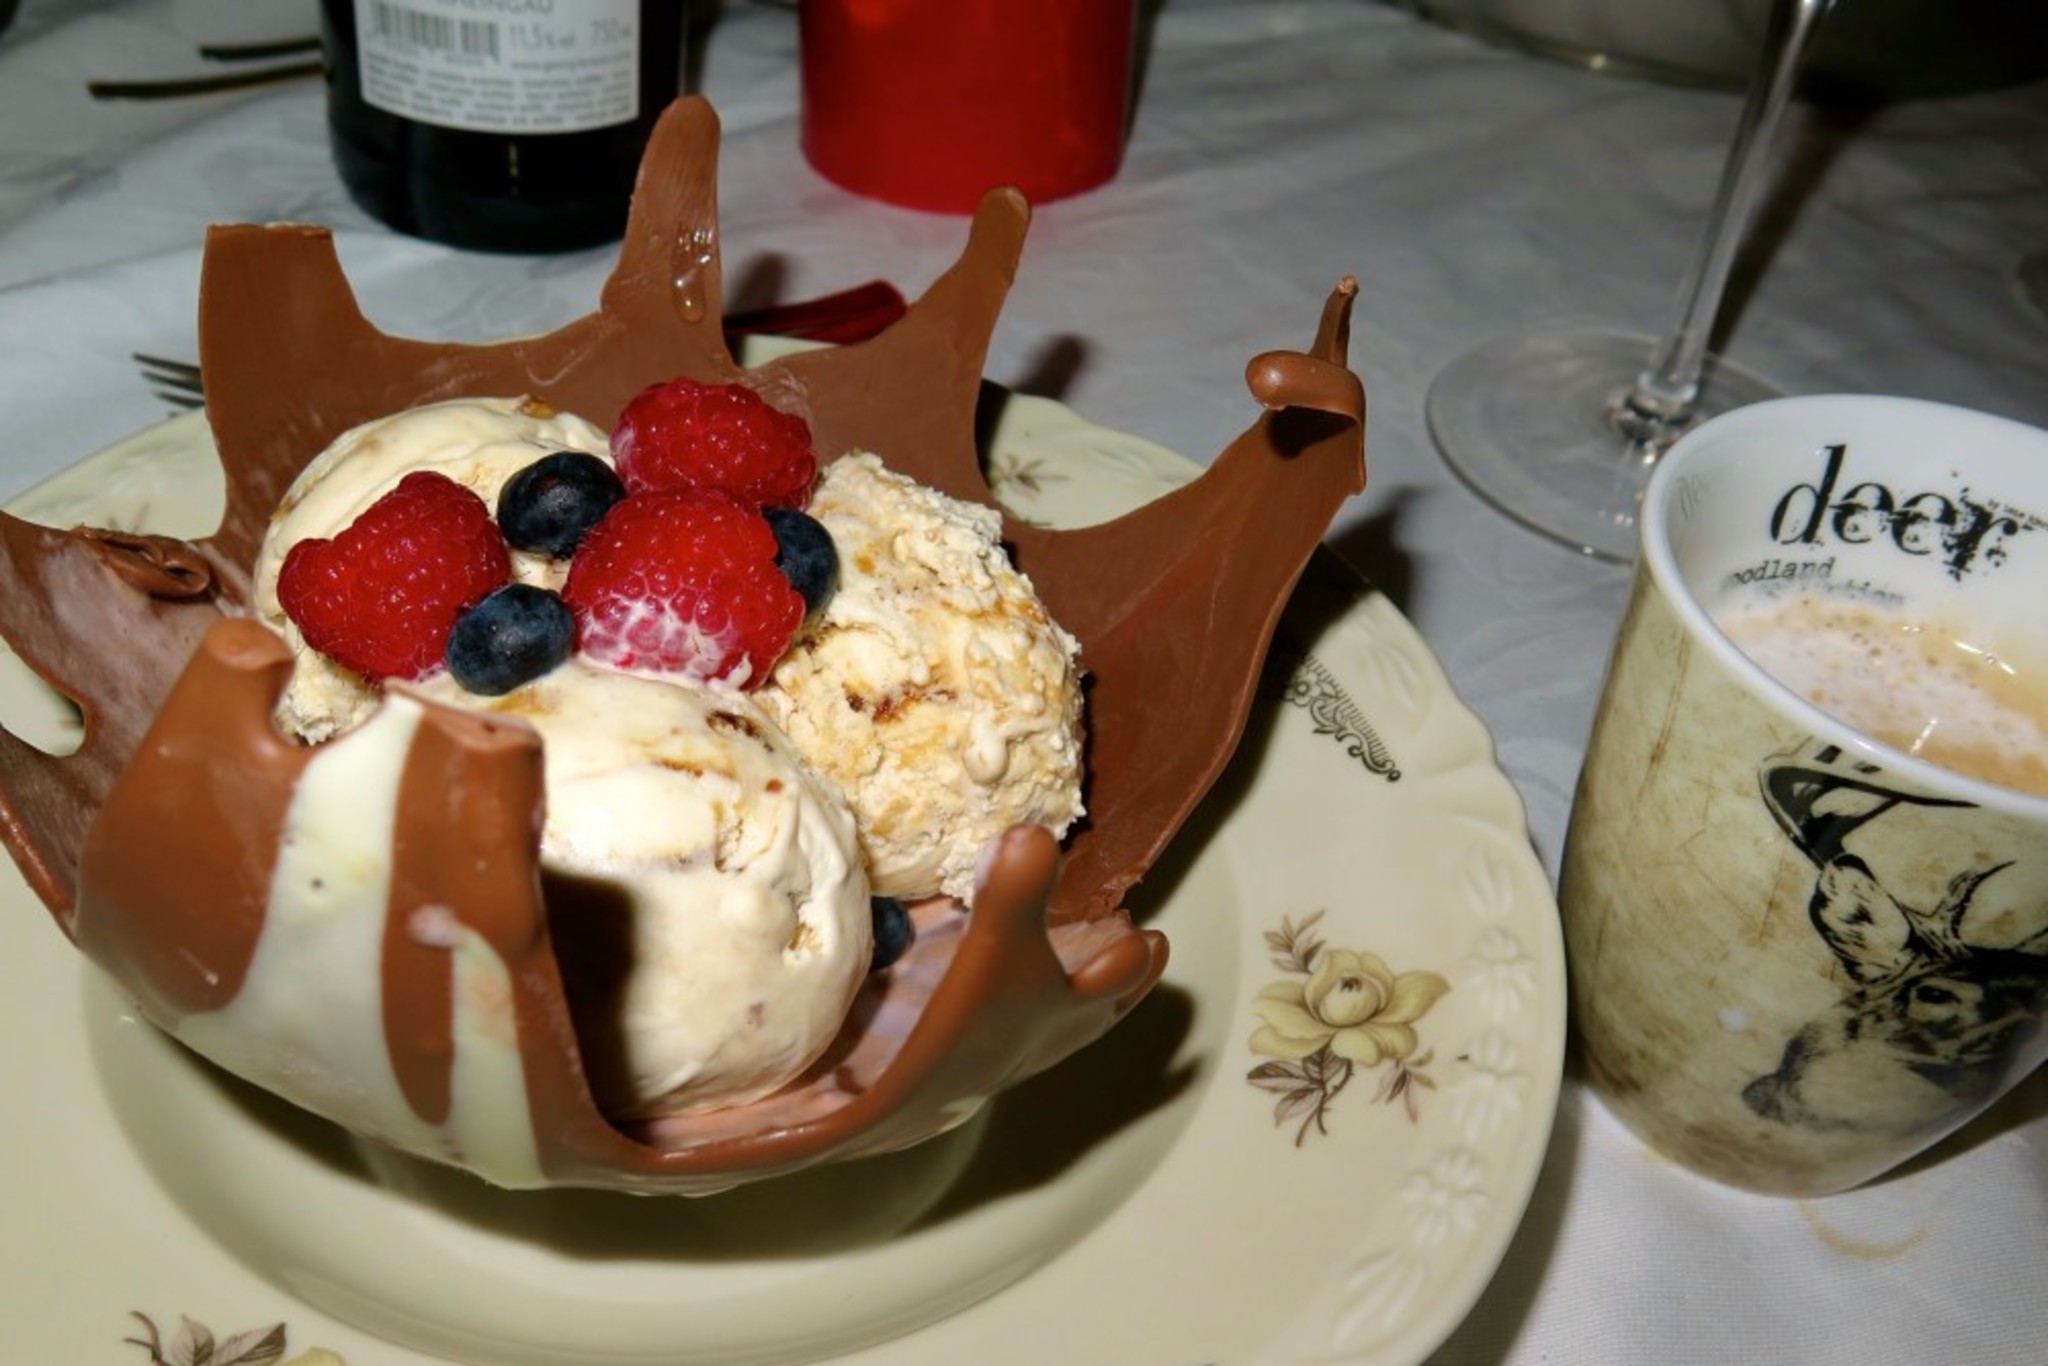 Chocolate with ice cream and berries.  Well done Cleopatra!